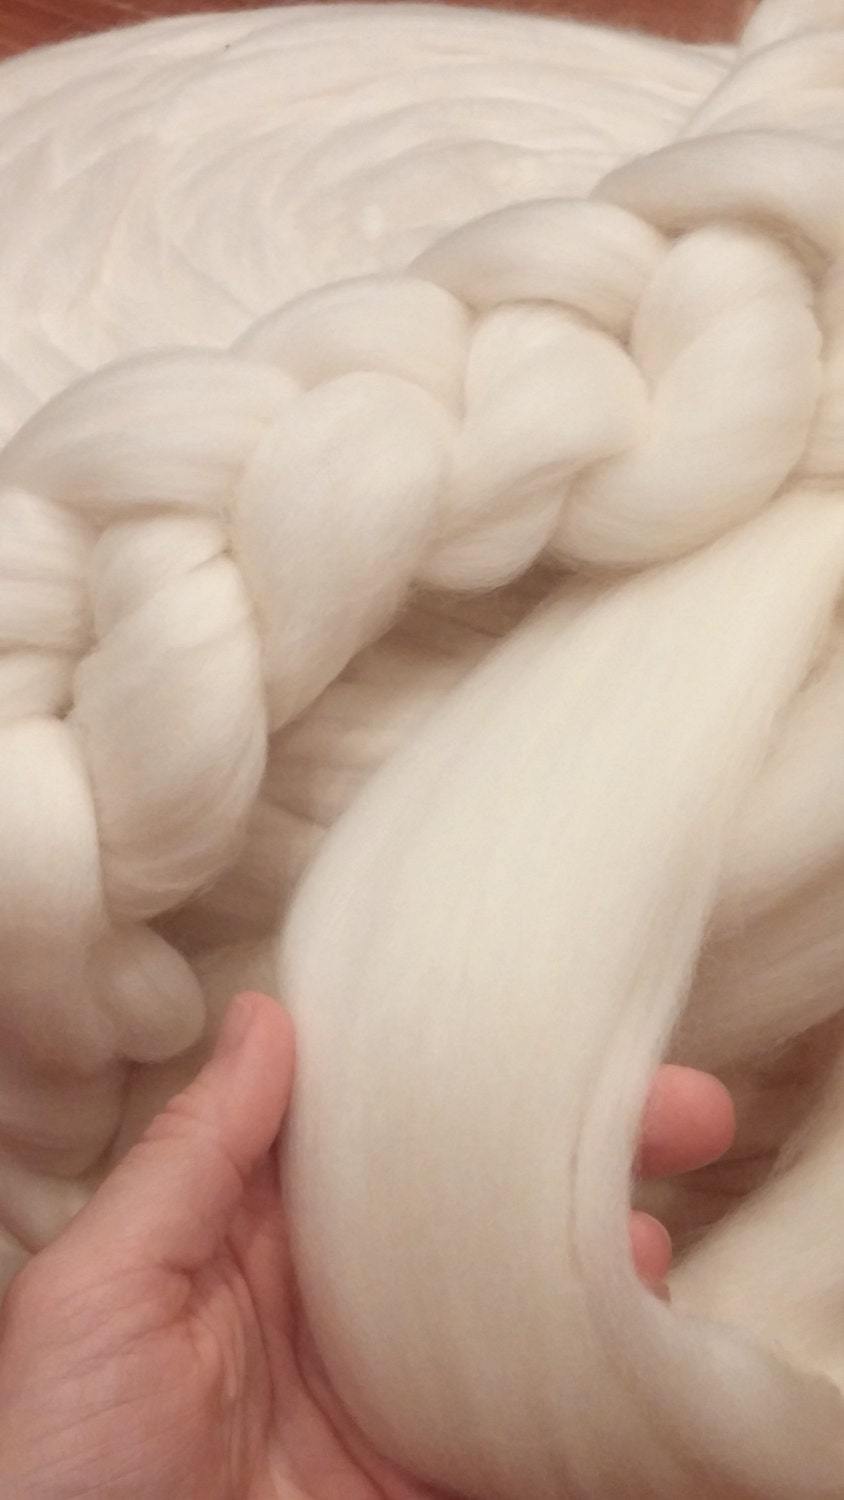 Spinning Wool  MERINO 23 mic Super Soft Wonderful handfeel a Joy to Spin into yarn!  Beginners and experianced Love our wool!